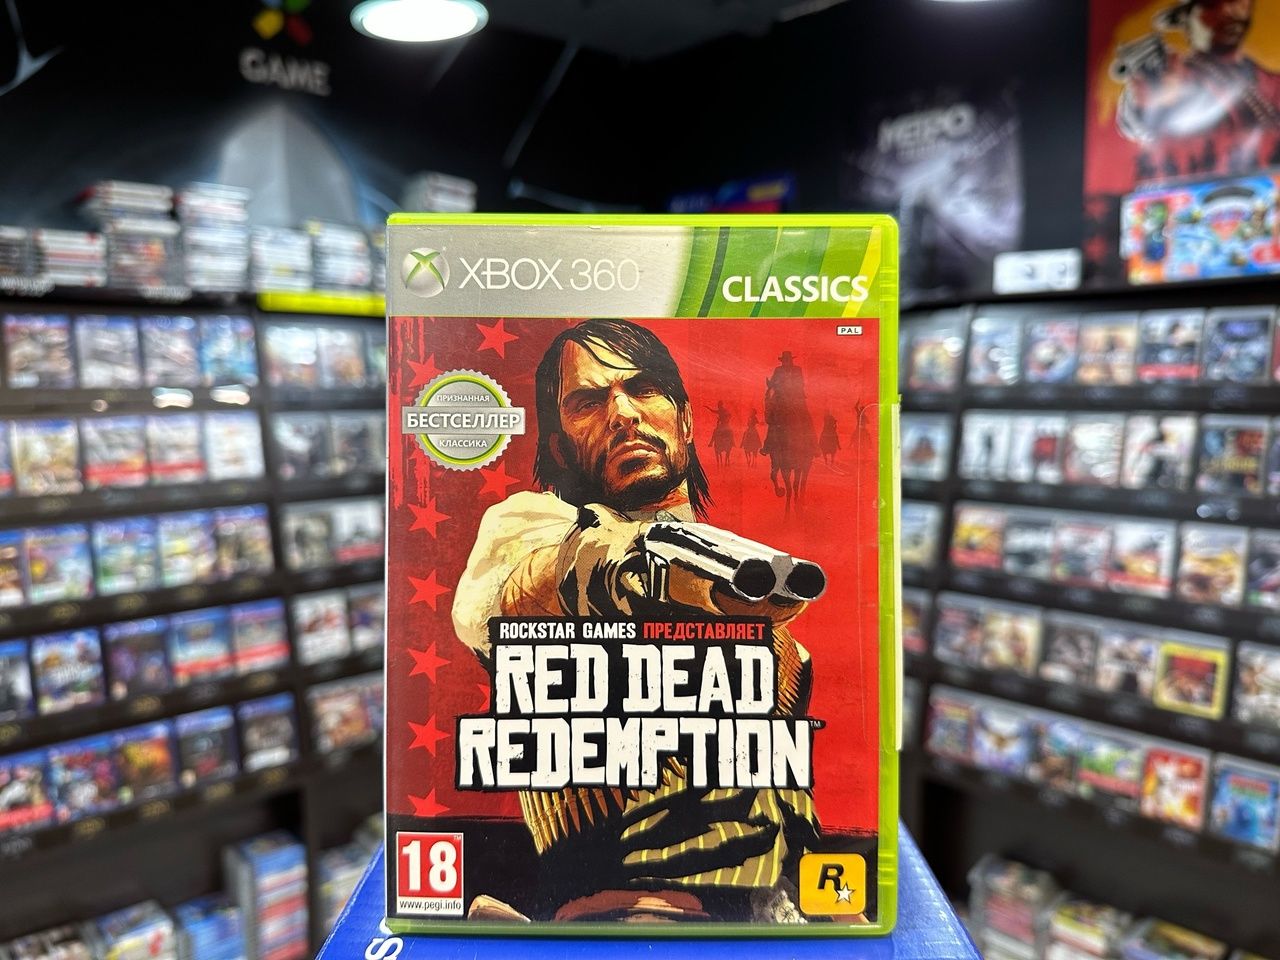 RED DEAD REDEMPTION - #1 - XBOX 360 